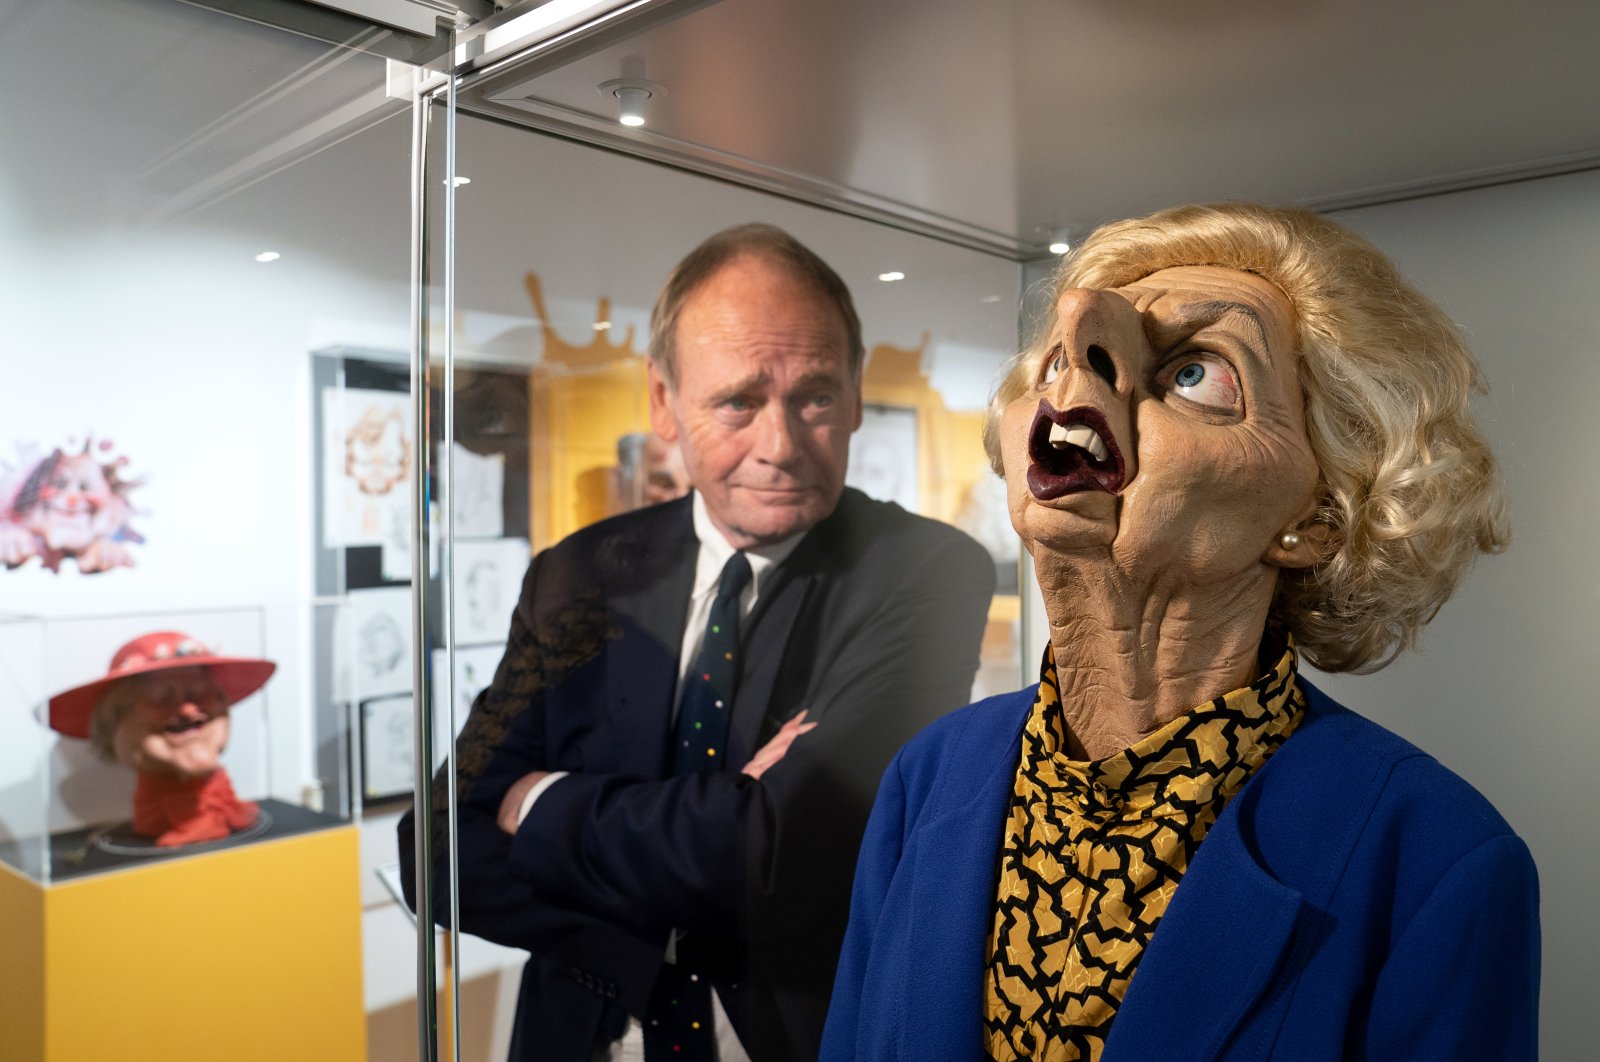 Spitting Image producer John Lloyd with a puppet of former Prime Minister Margaret Thatcher during the preview for the Spitting Image exhibition at Cambridge University Library, London, U.K., Sept. 28, 2023. (dpa Photo) 